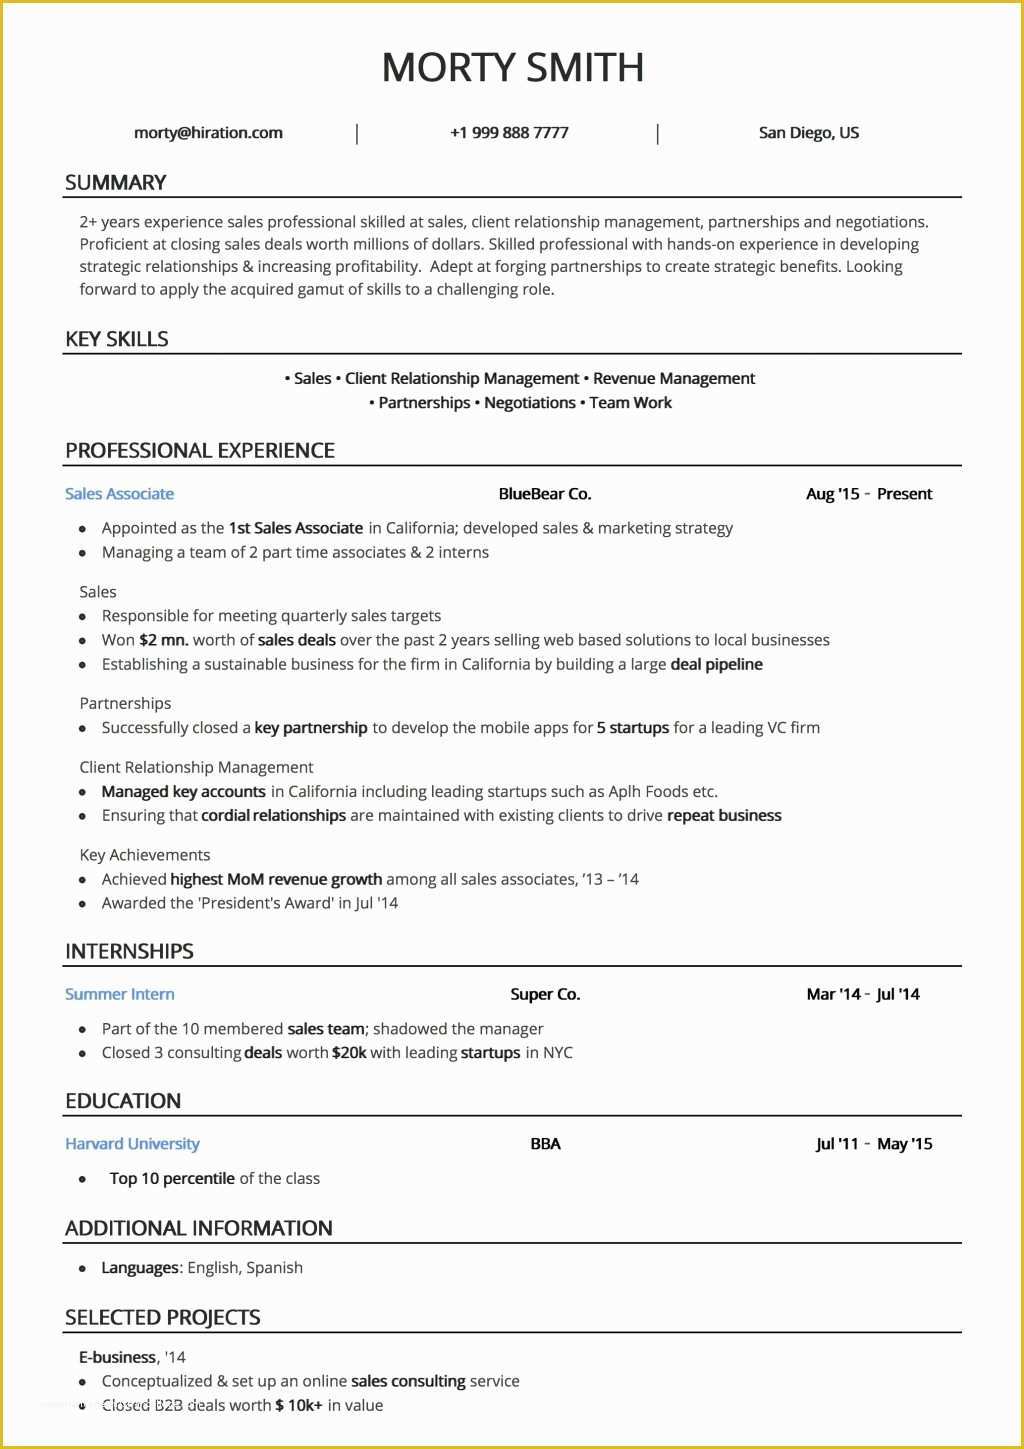 Free Resume Templates Pdf Of Resume and Template 53 Extraordinary Resume Free Template